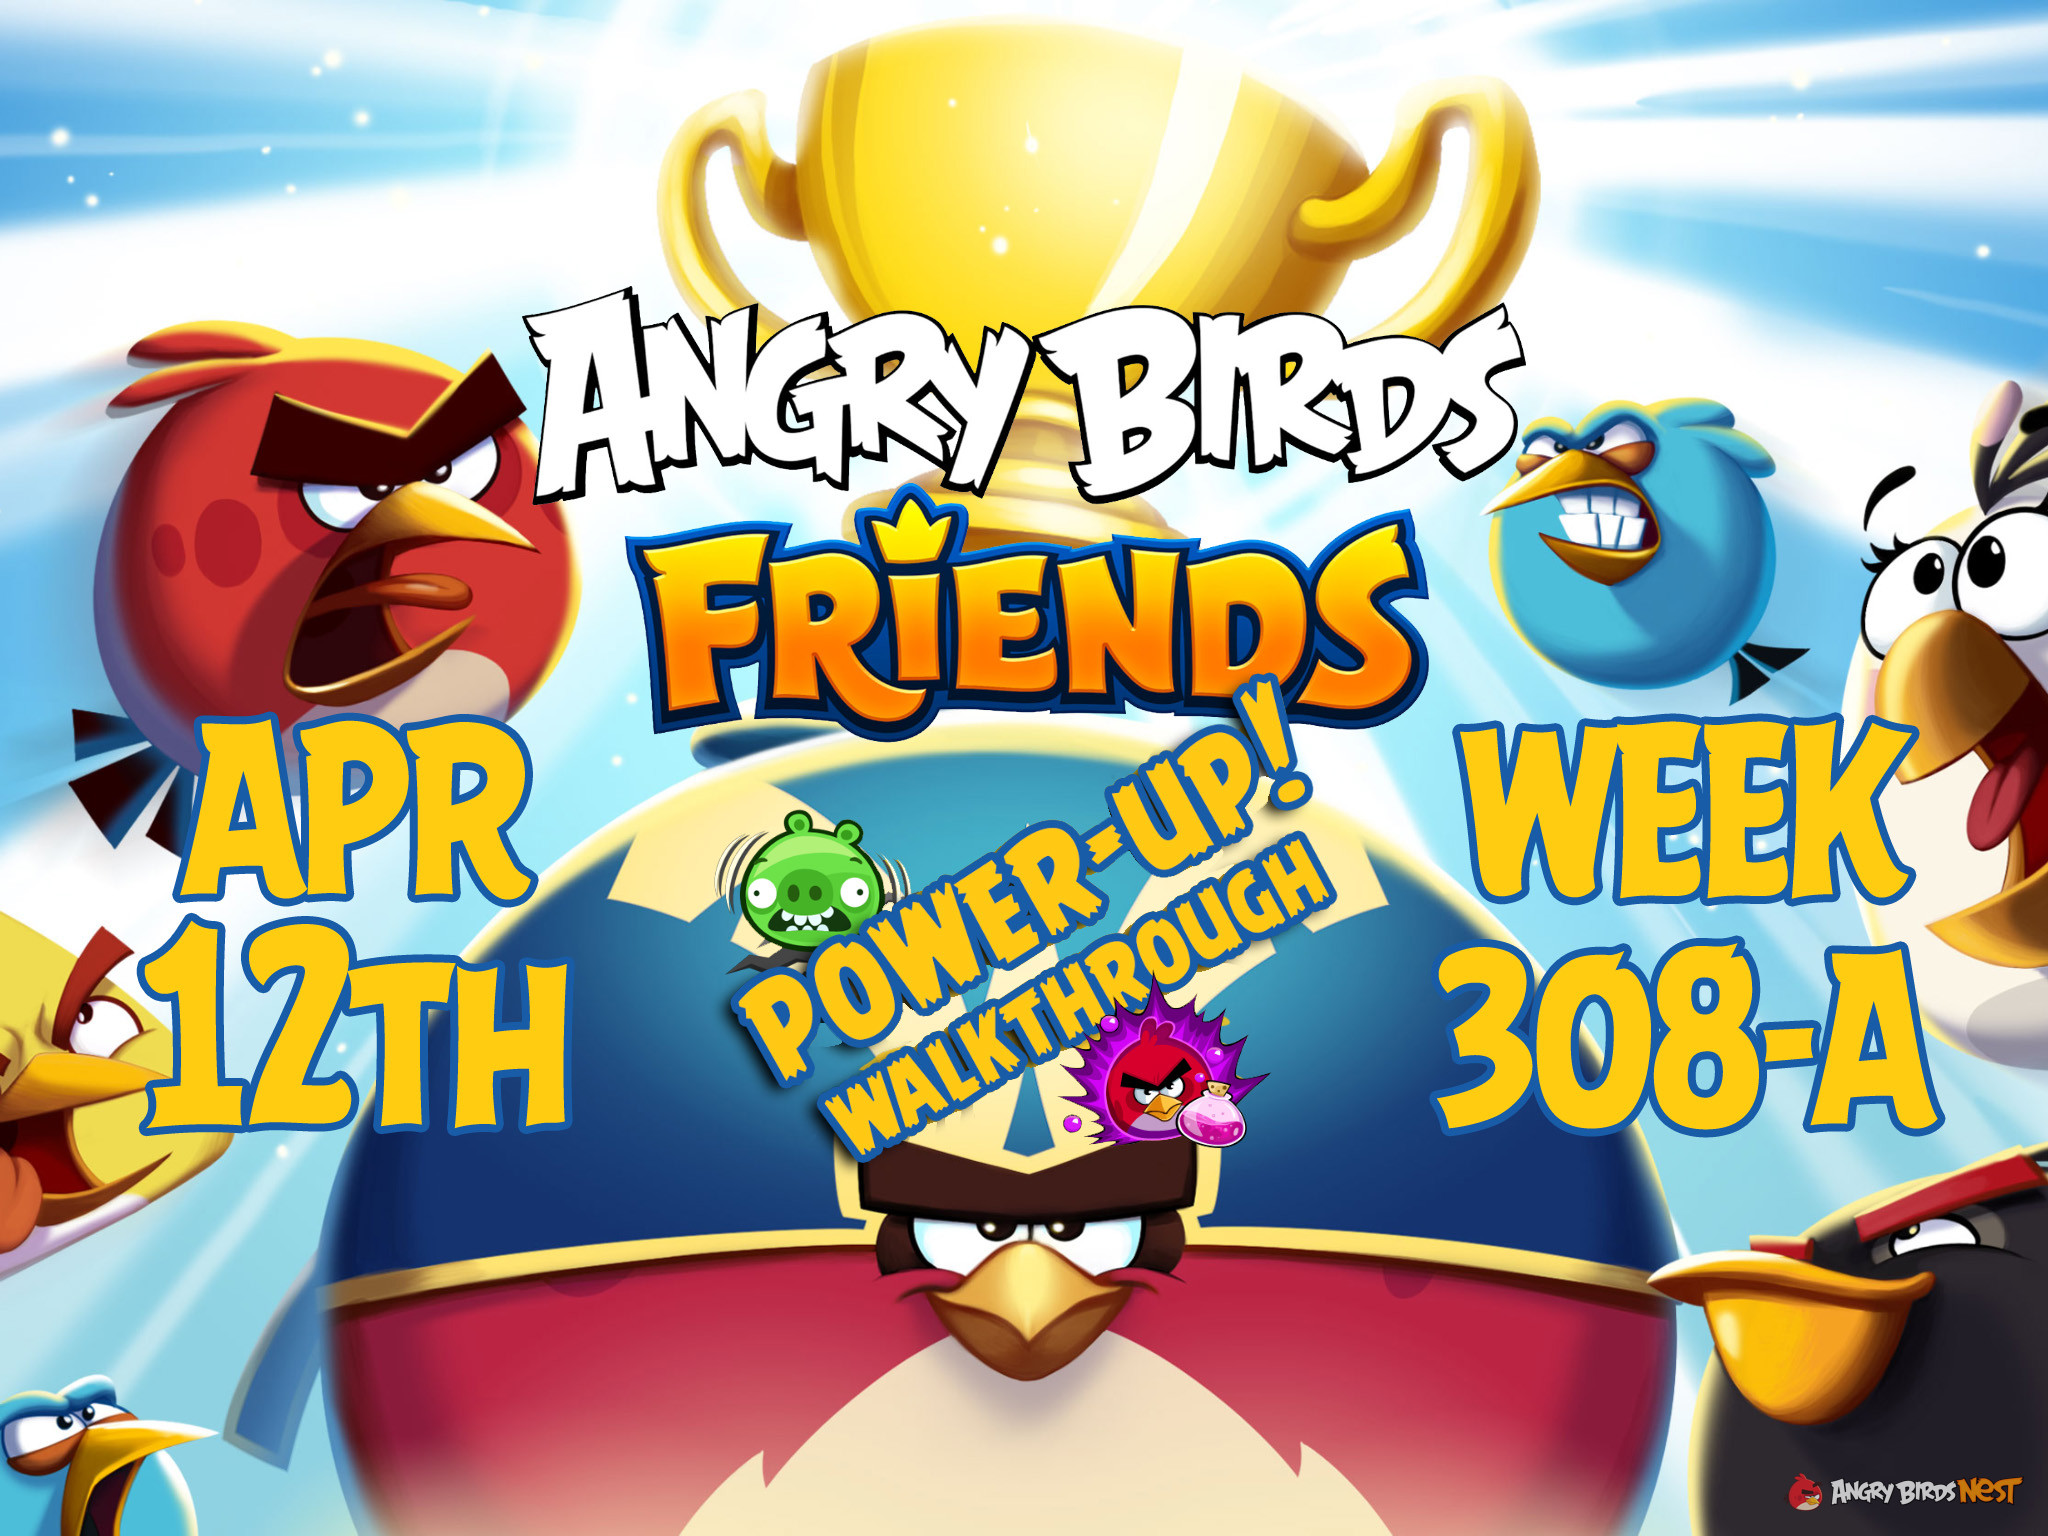 Angry Birds Friends Tournament Week 308-A Feature Image PU